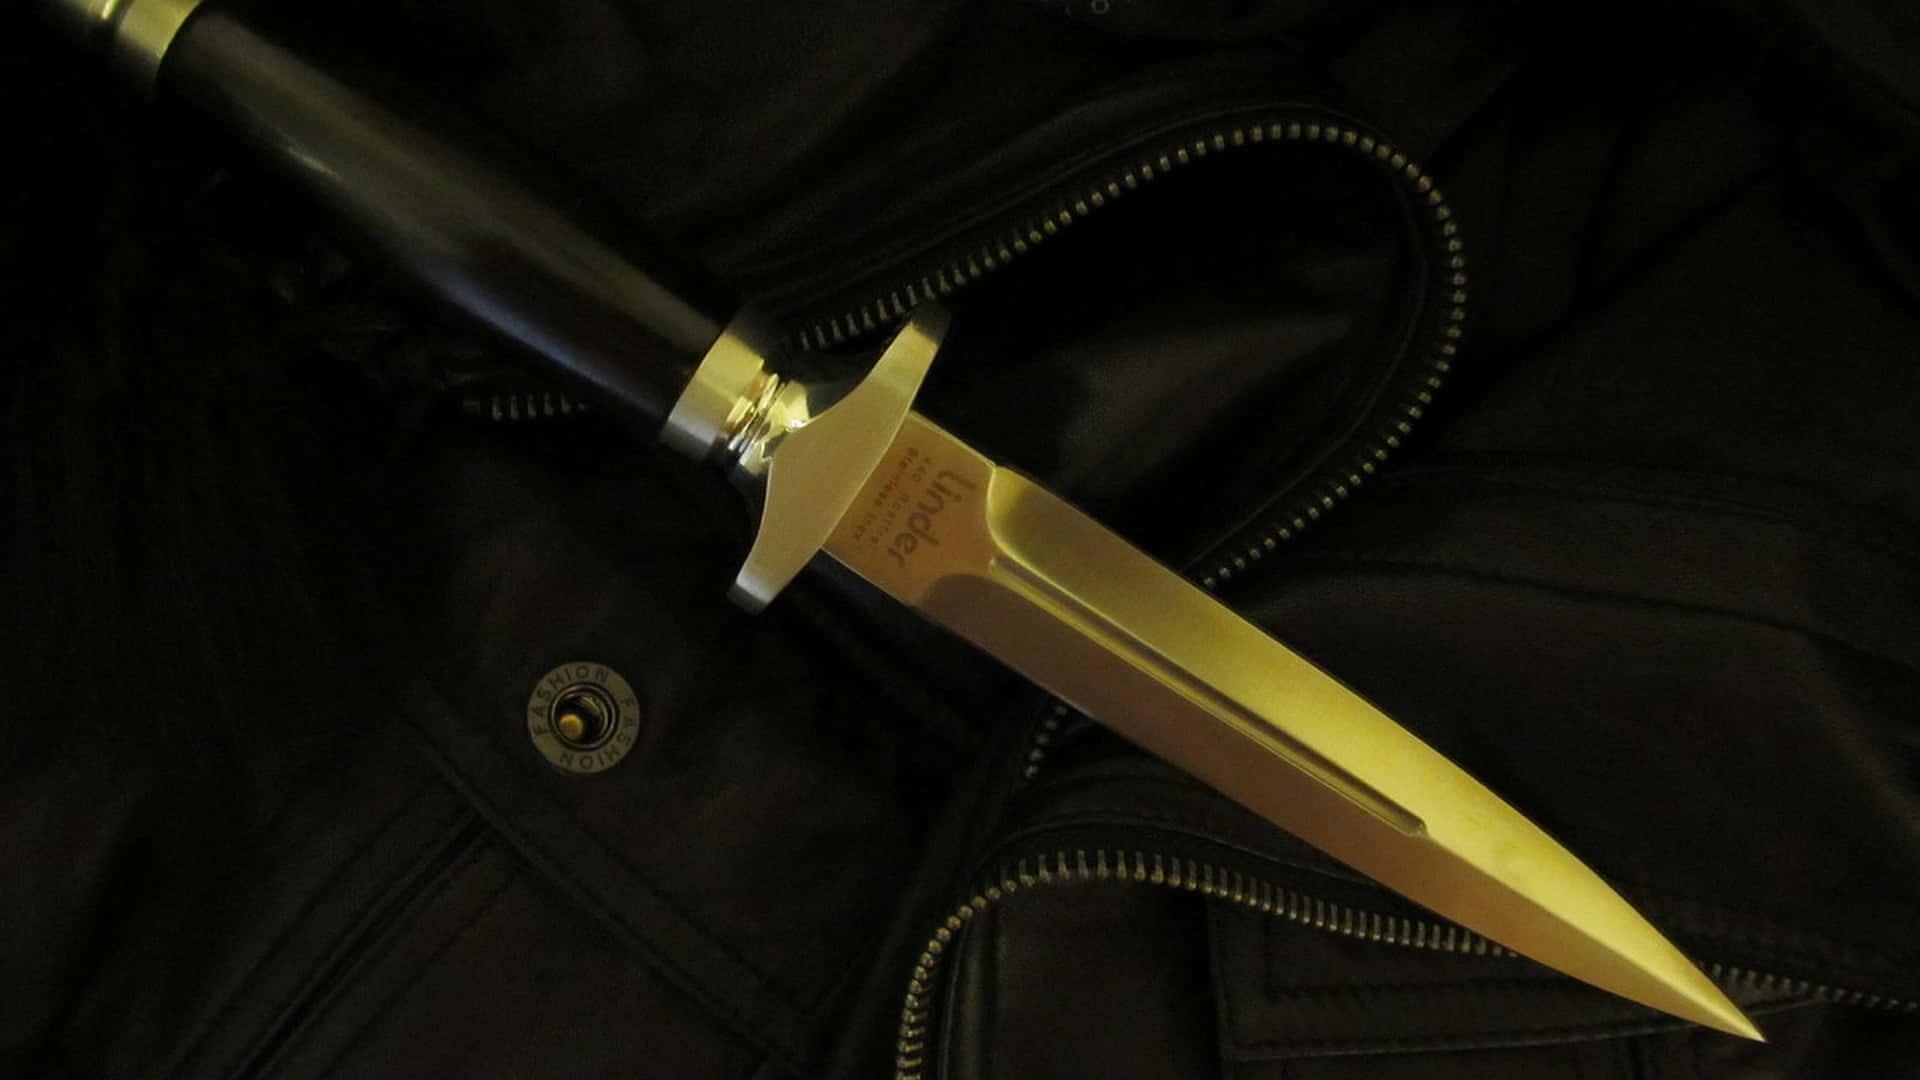 A Gold Knife Is Sitting On A Leather Jacket